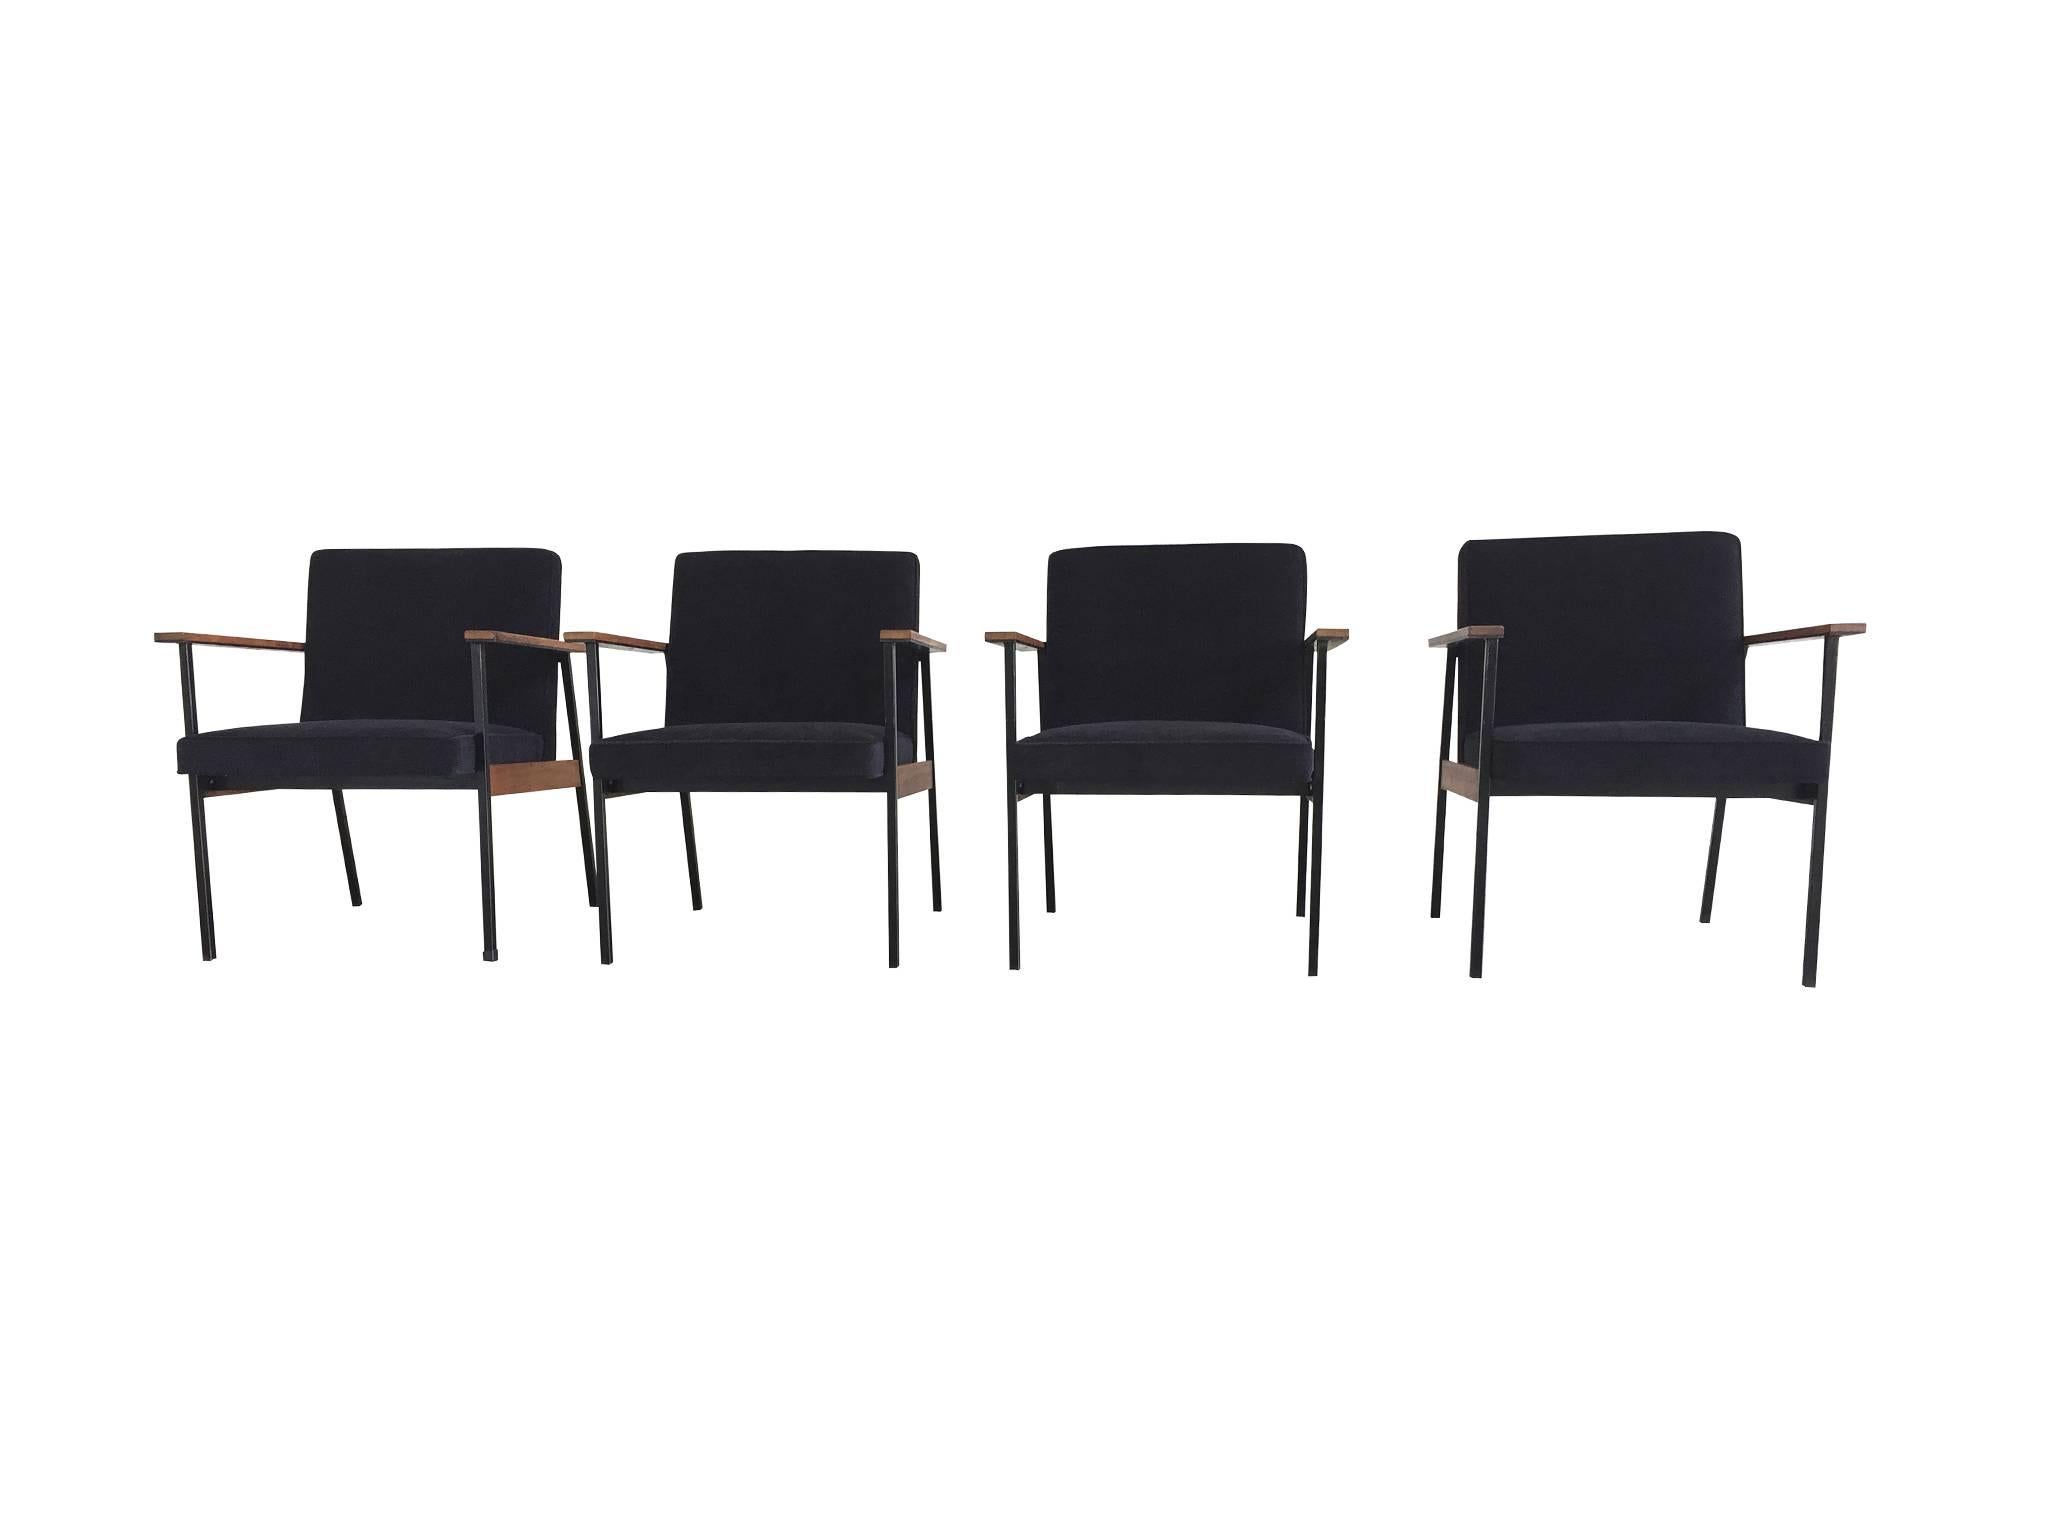 These four office chairs are attributed to the American designer, Paul McCobb. They were manufactured in the late 1950s and are in excellent condition. The frame consists of iron and walnut wood, while the seat and back are cushioned and